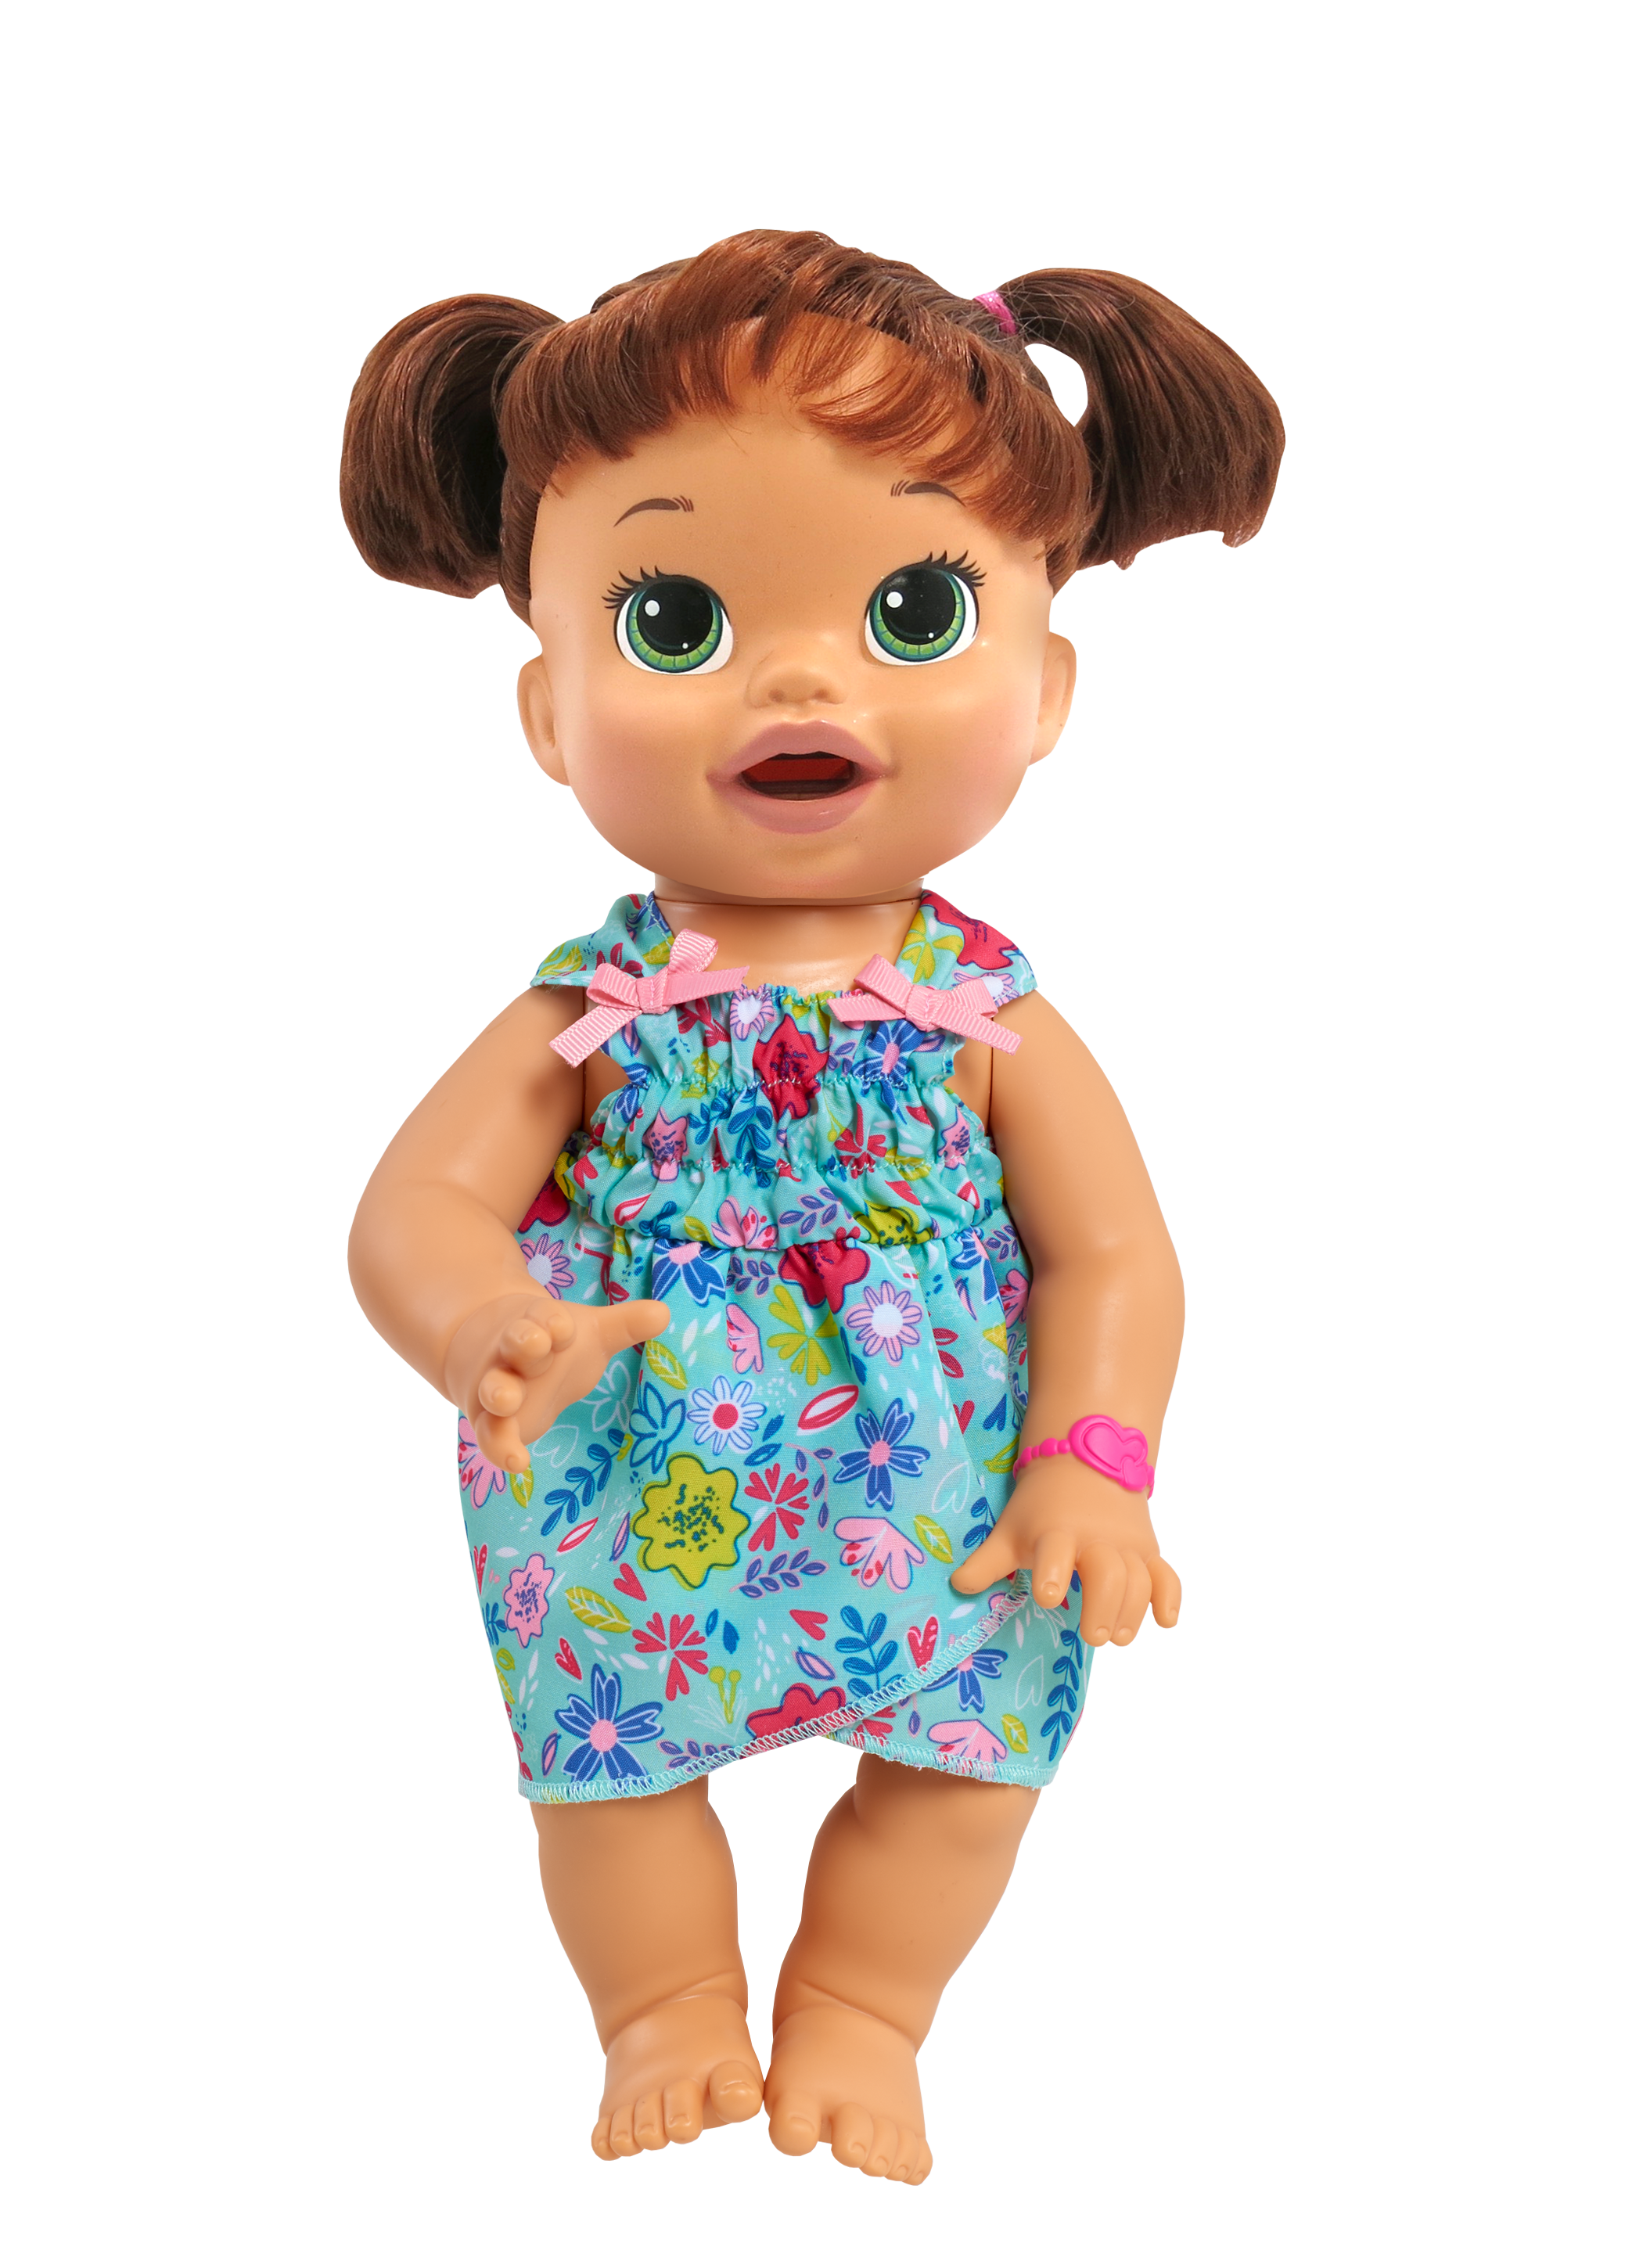 baby alive mix and match outfits